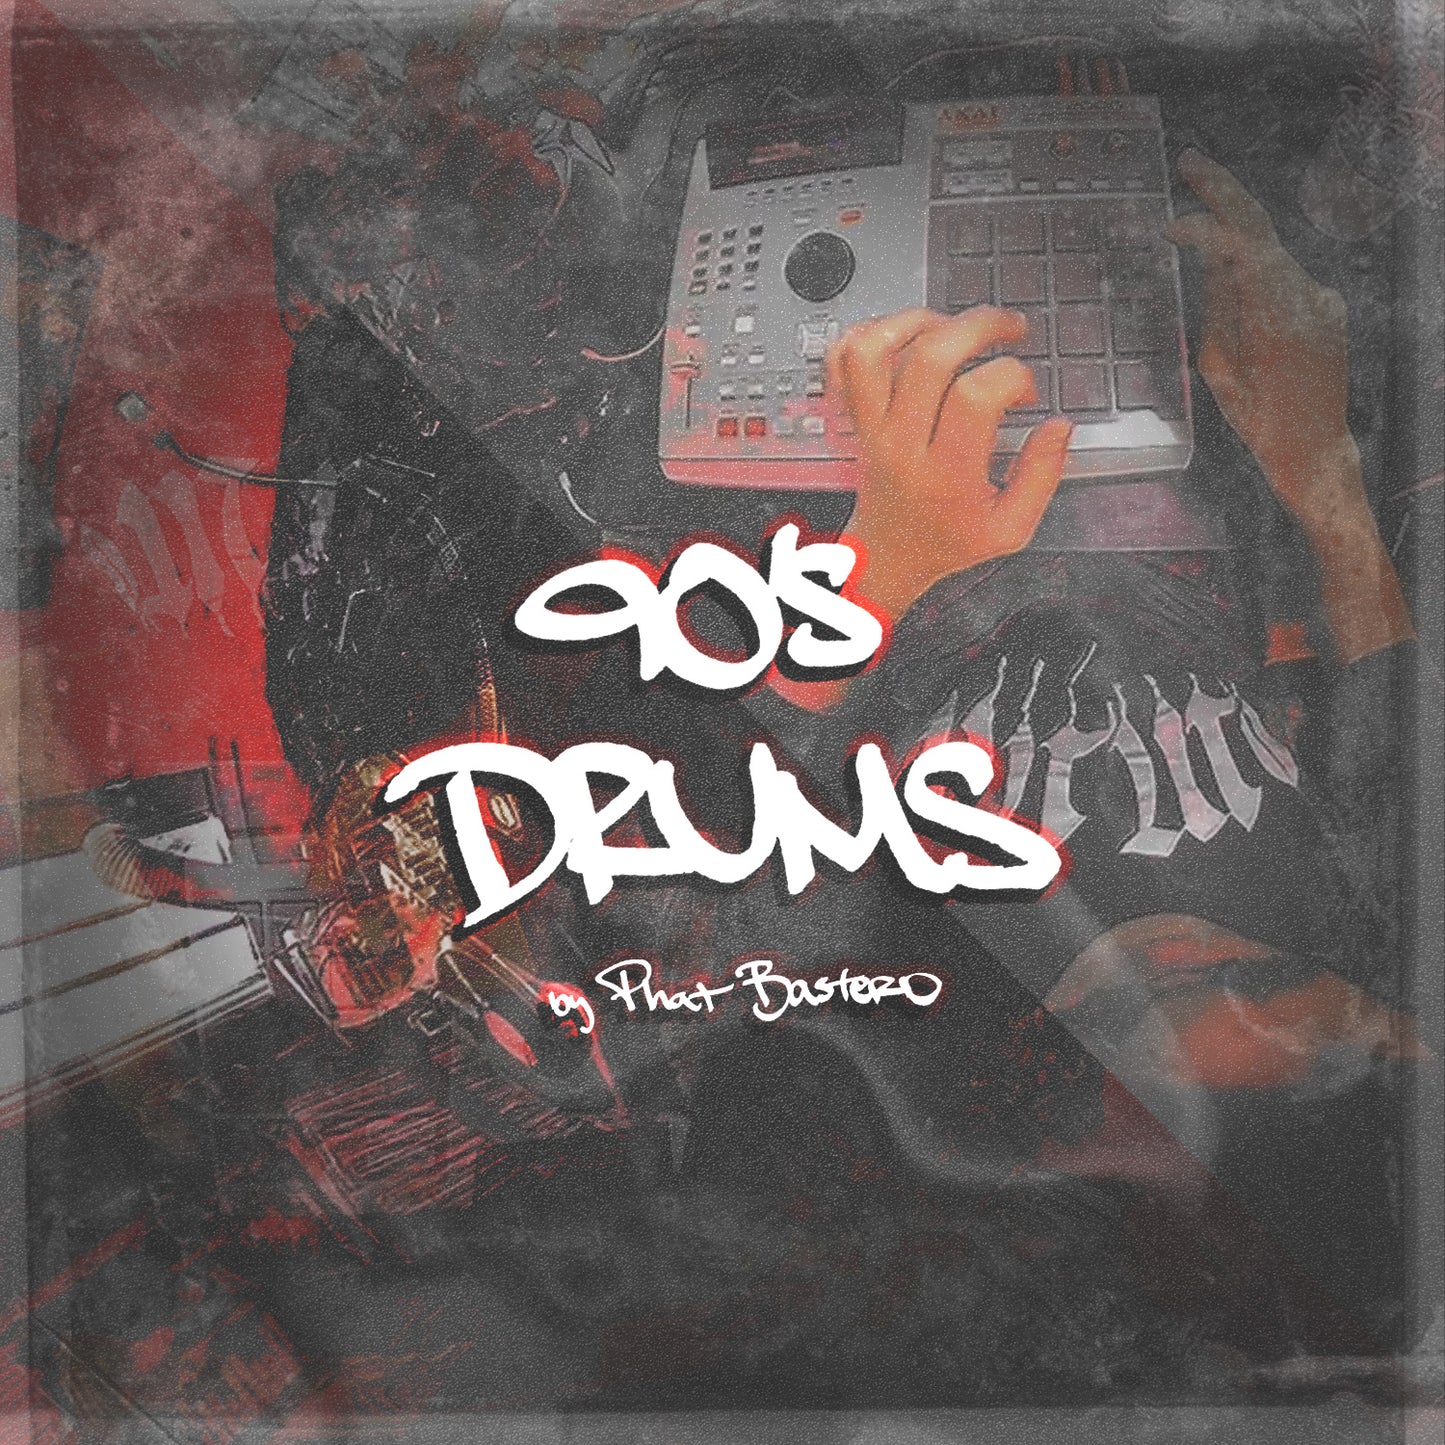 90's Drums by Phat Basterd